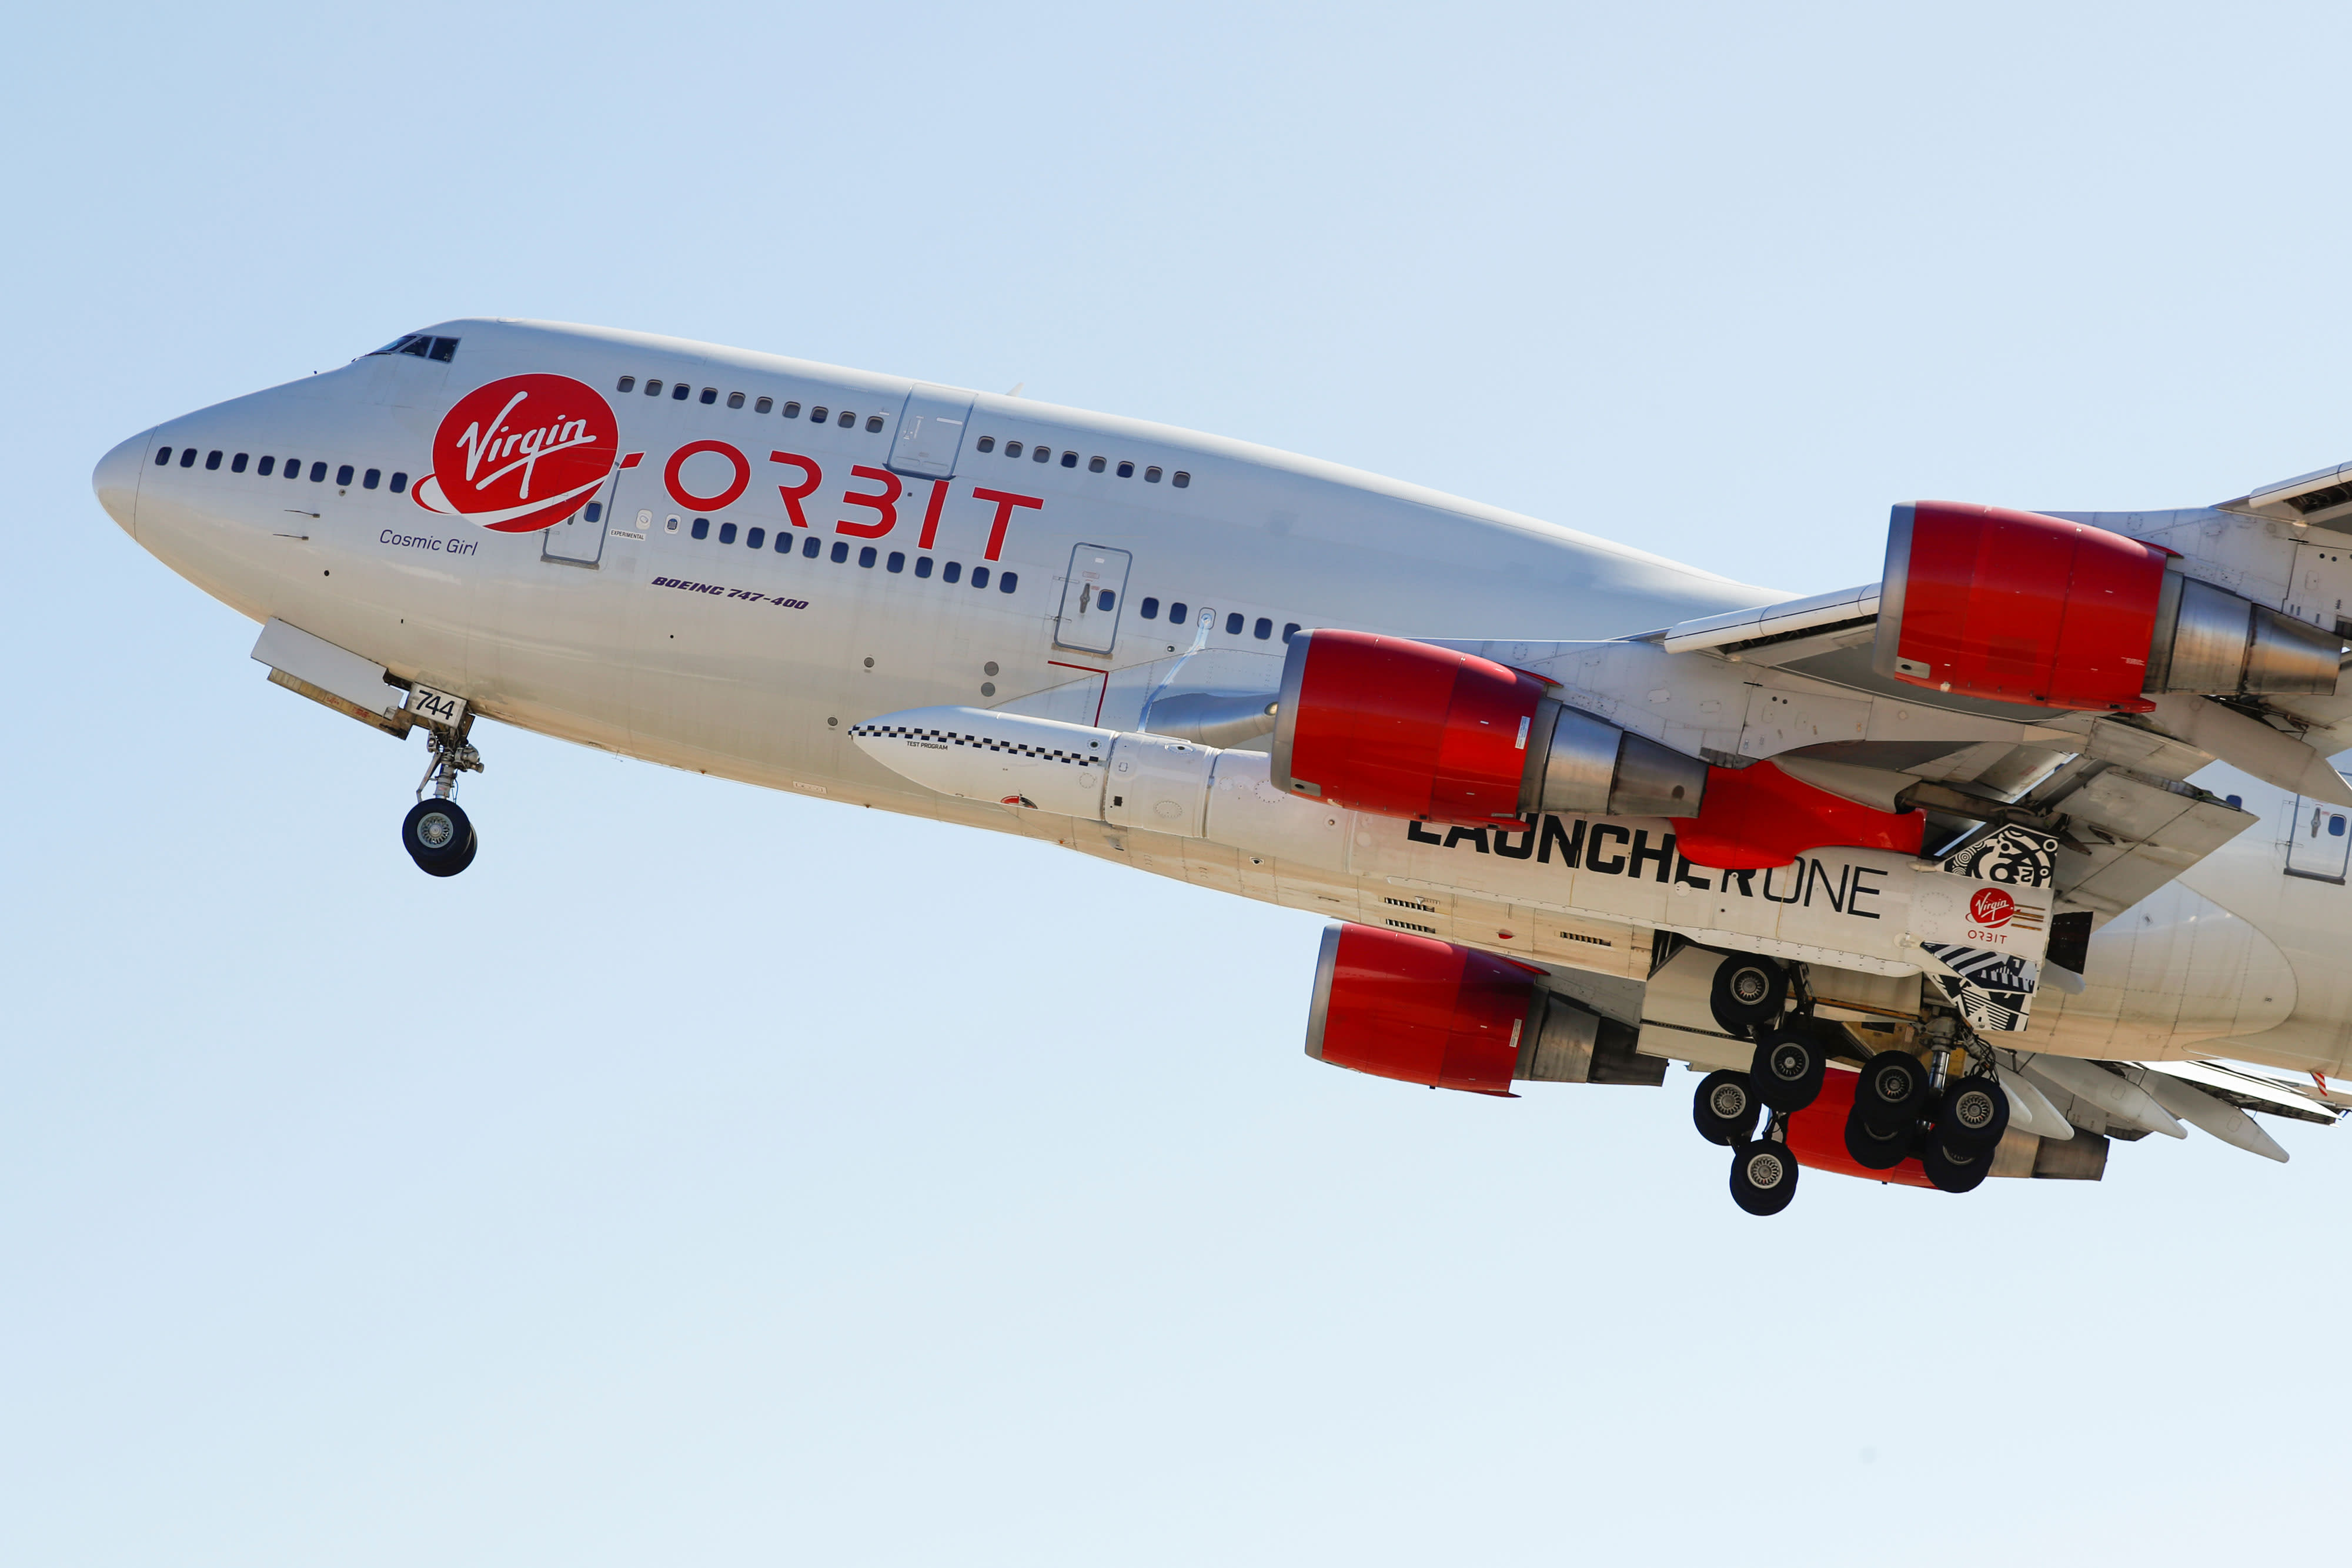 Here's what led Virgin Orbit to bankruptcy